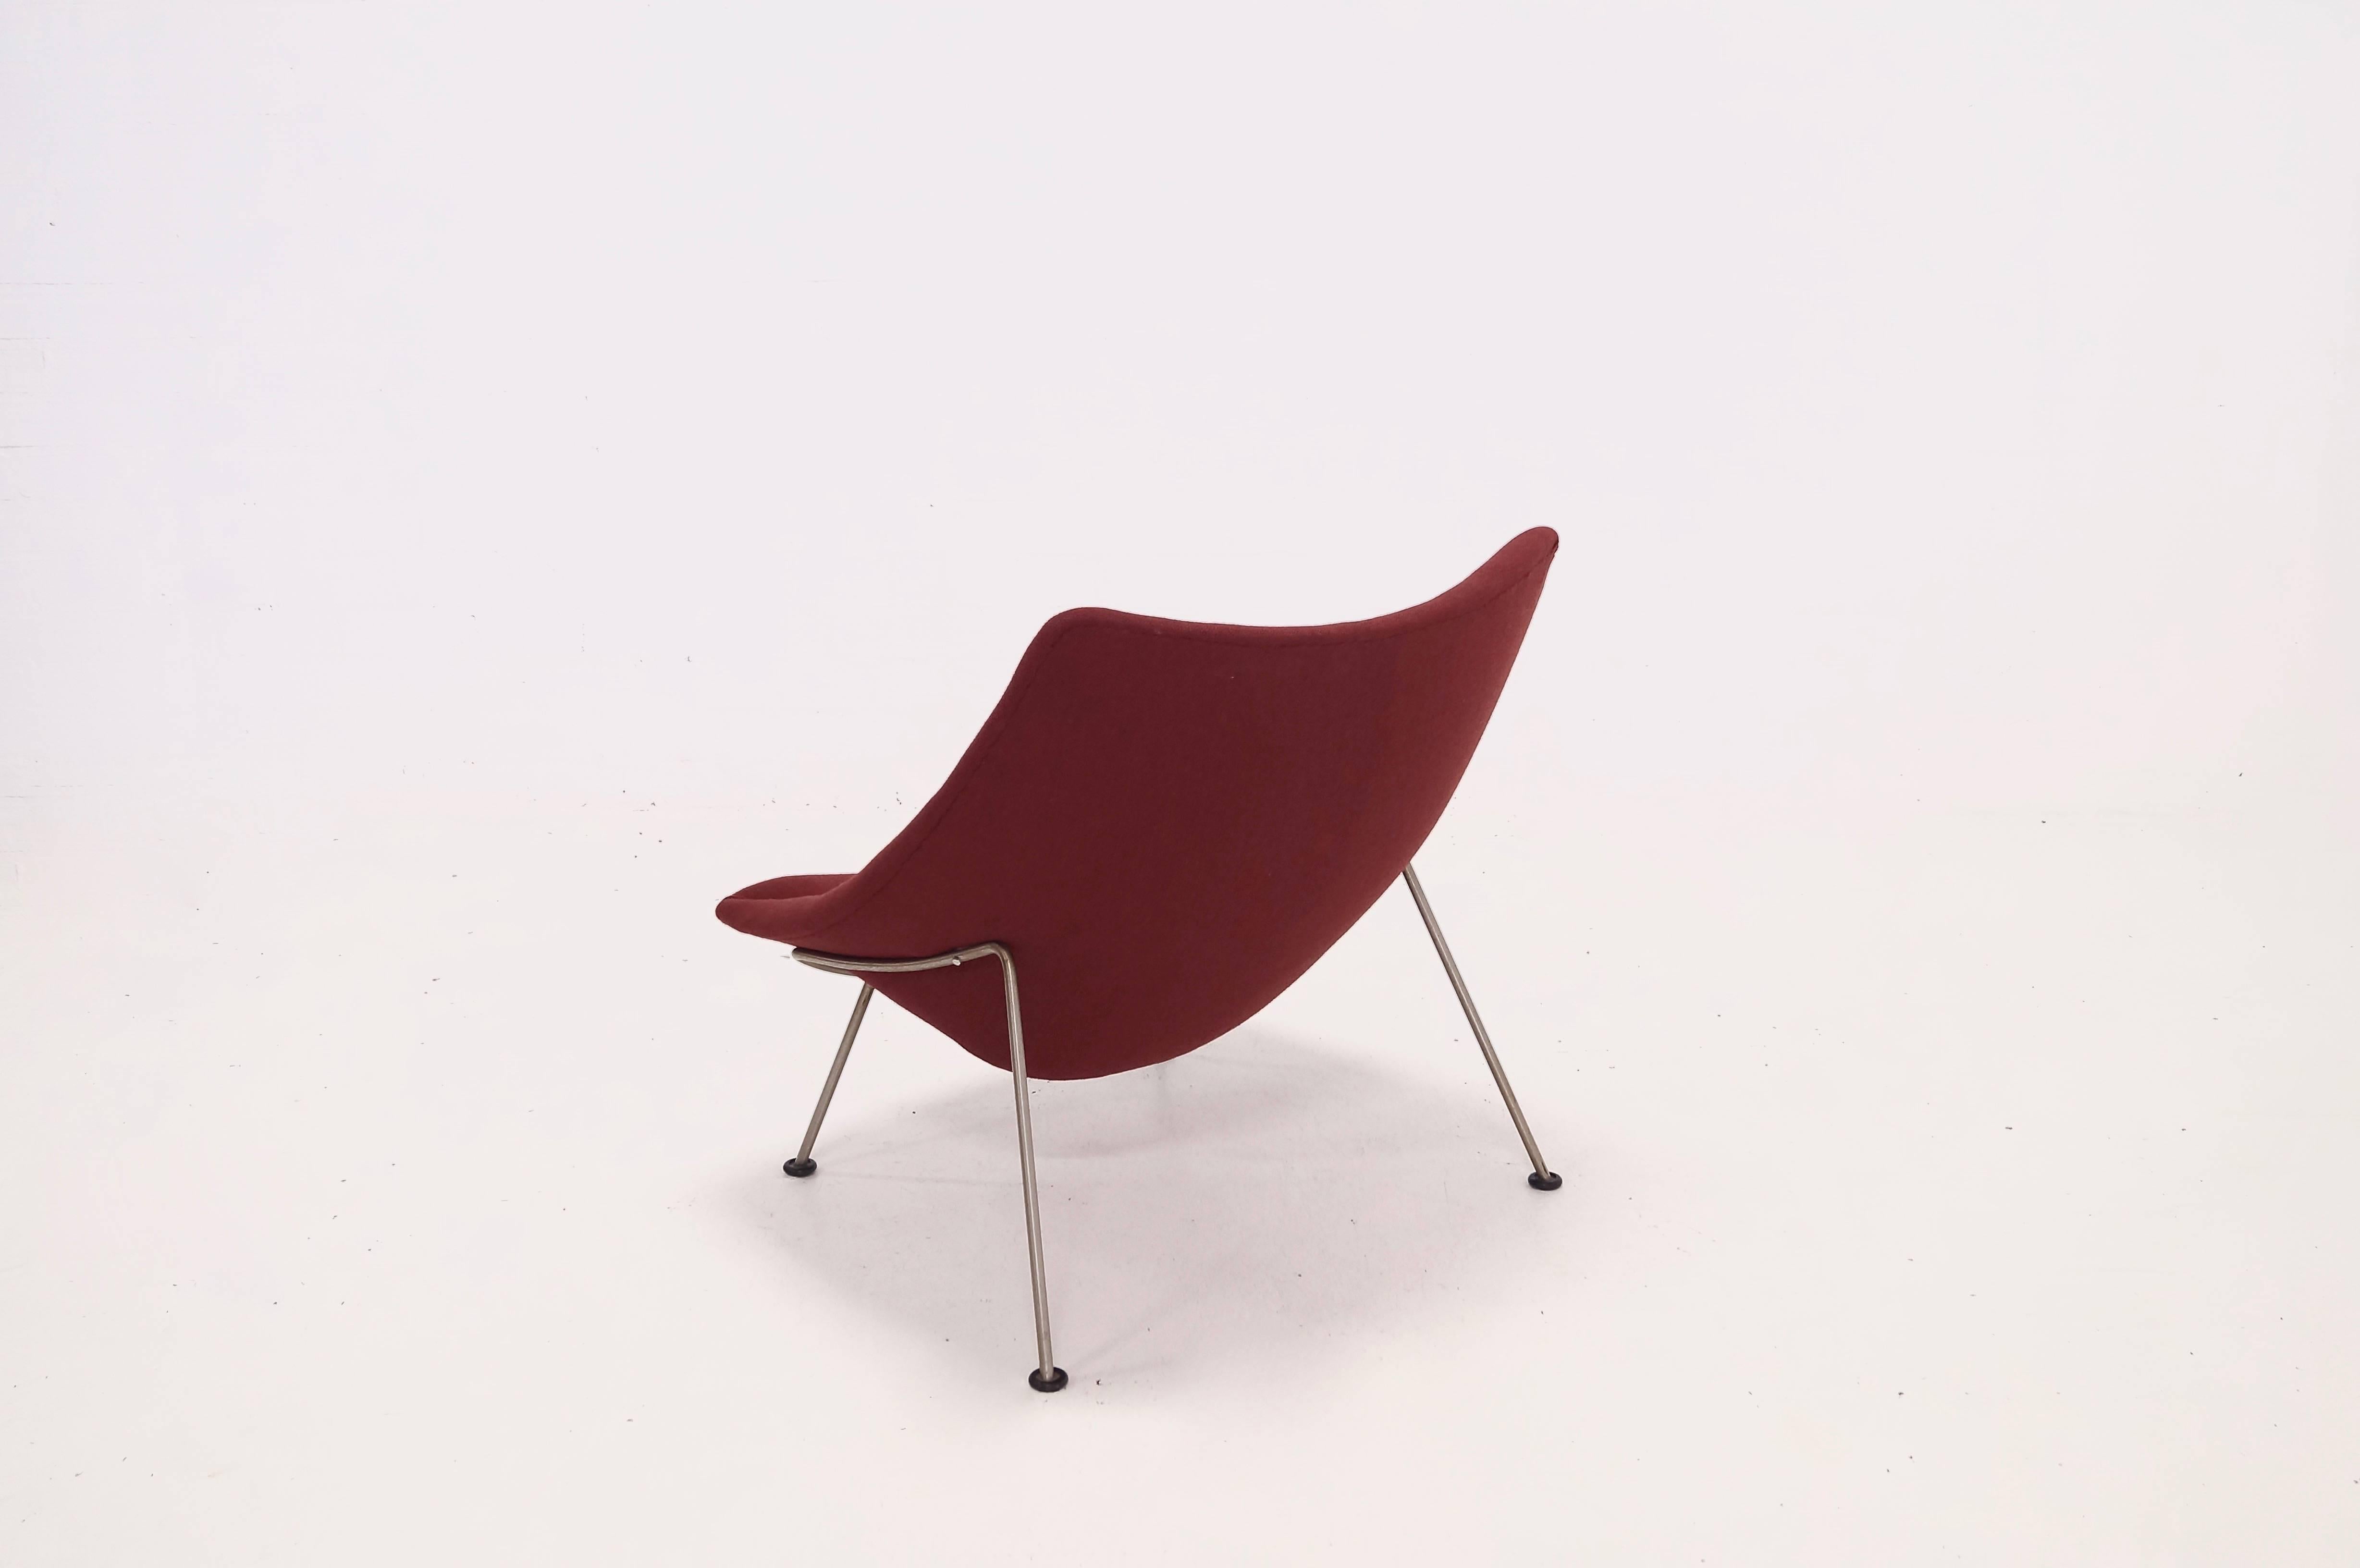 First edition large F157 oyster chair designed by Pierre Paulin for Artifort in 1958. The chair features a well designed chromed metal frame which gives the chair a floating appearance.